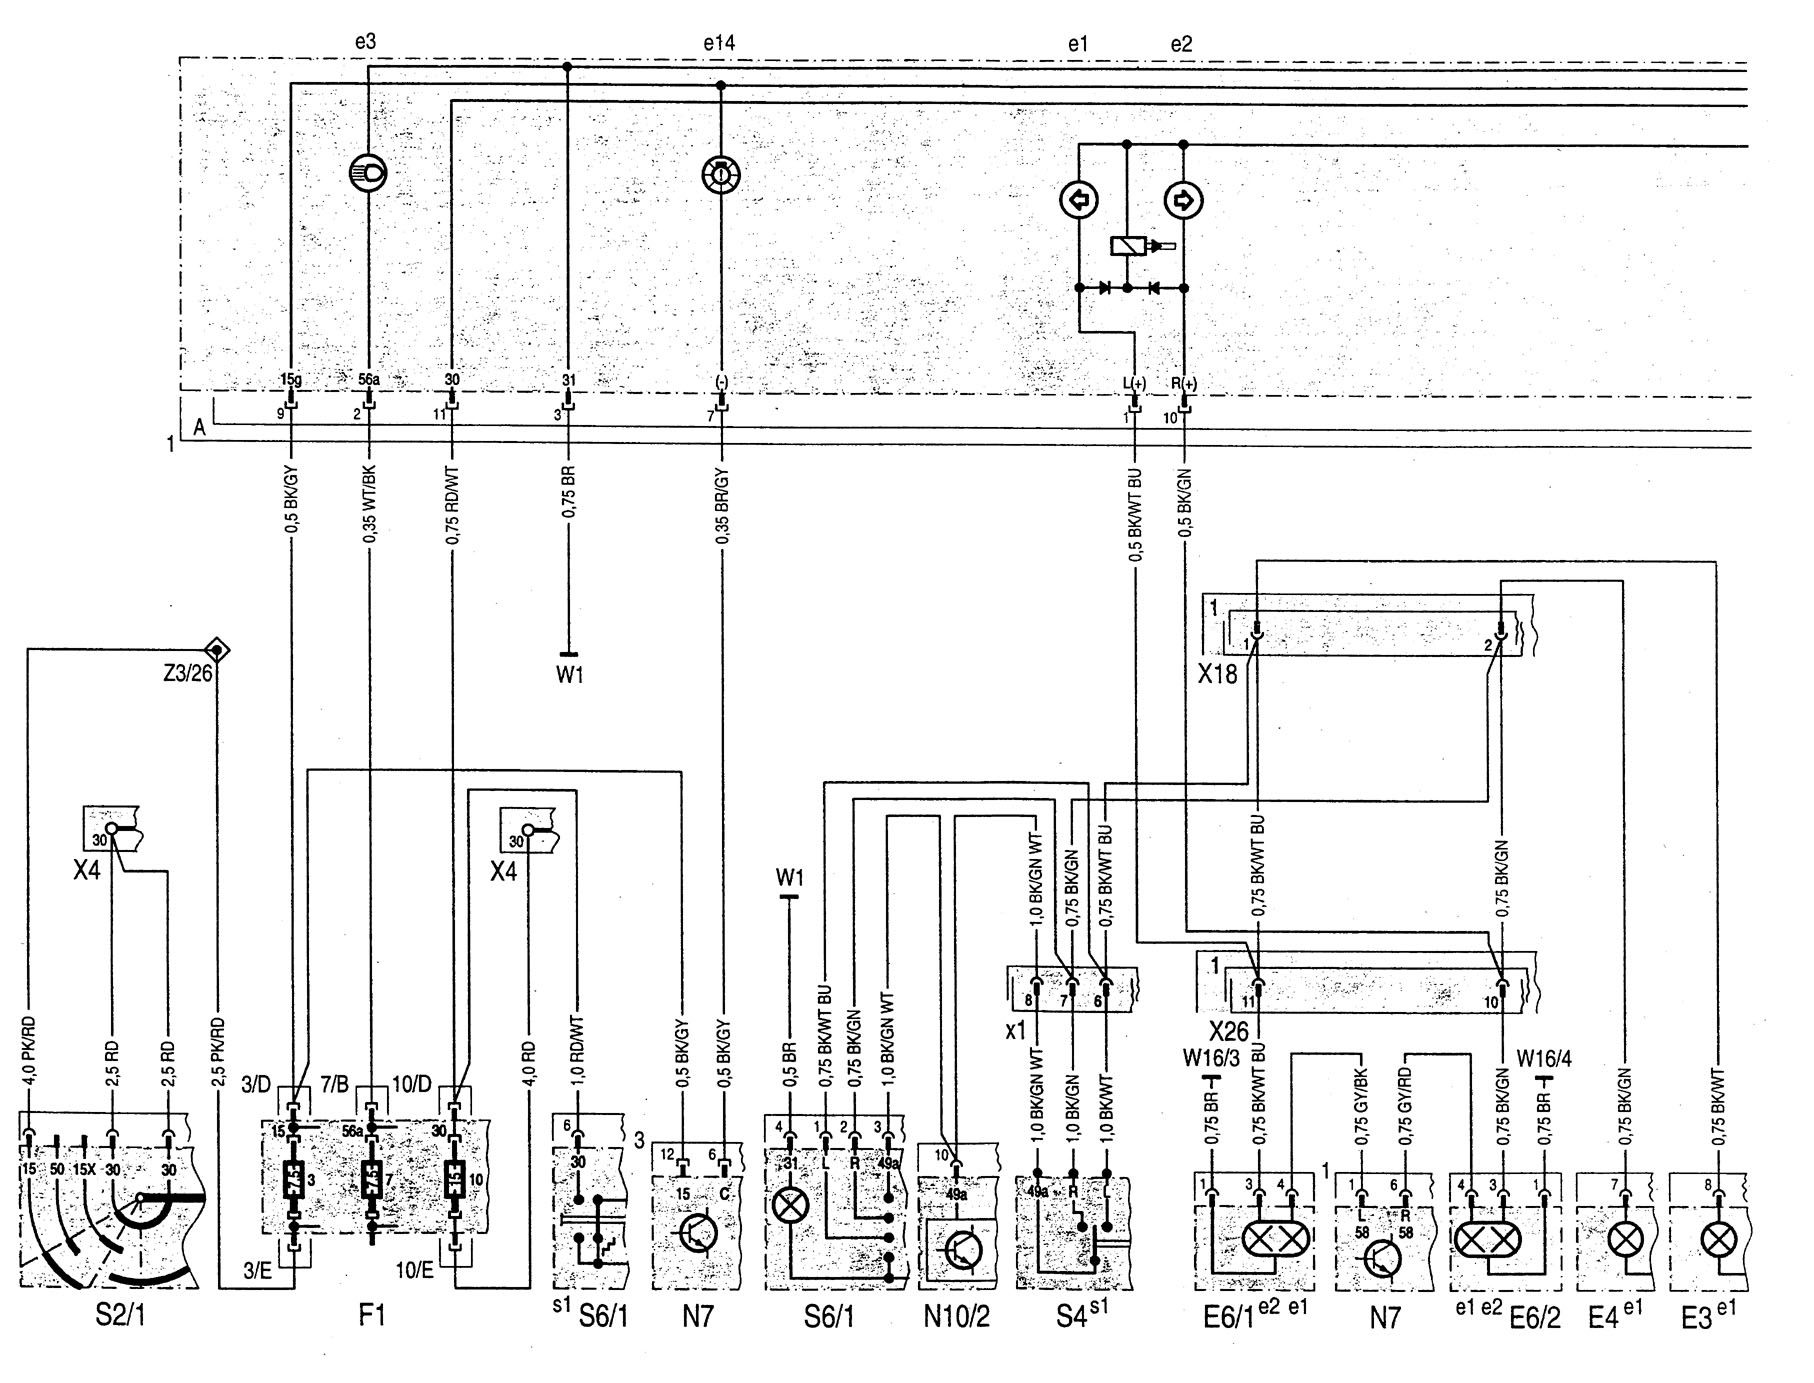 2006 Mercedes C280 Radio Wiring Diagram from www.carknowledge.info